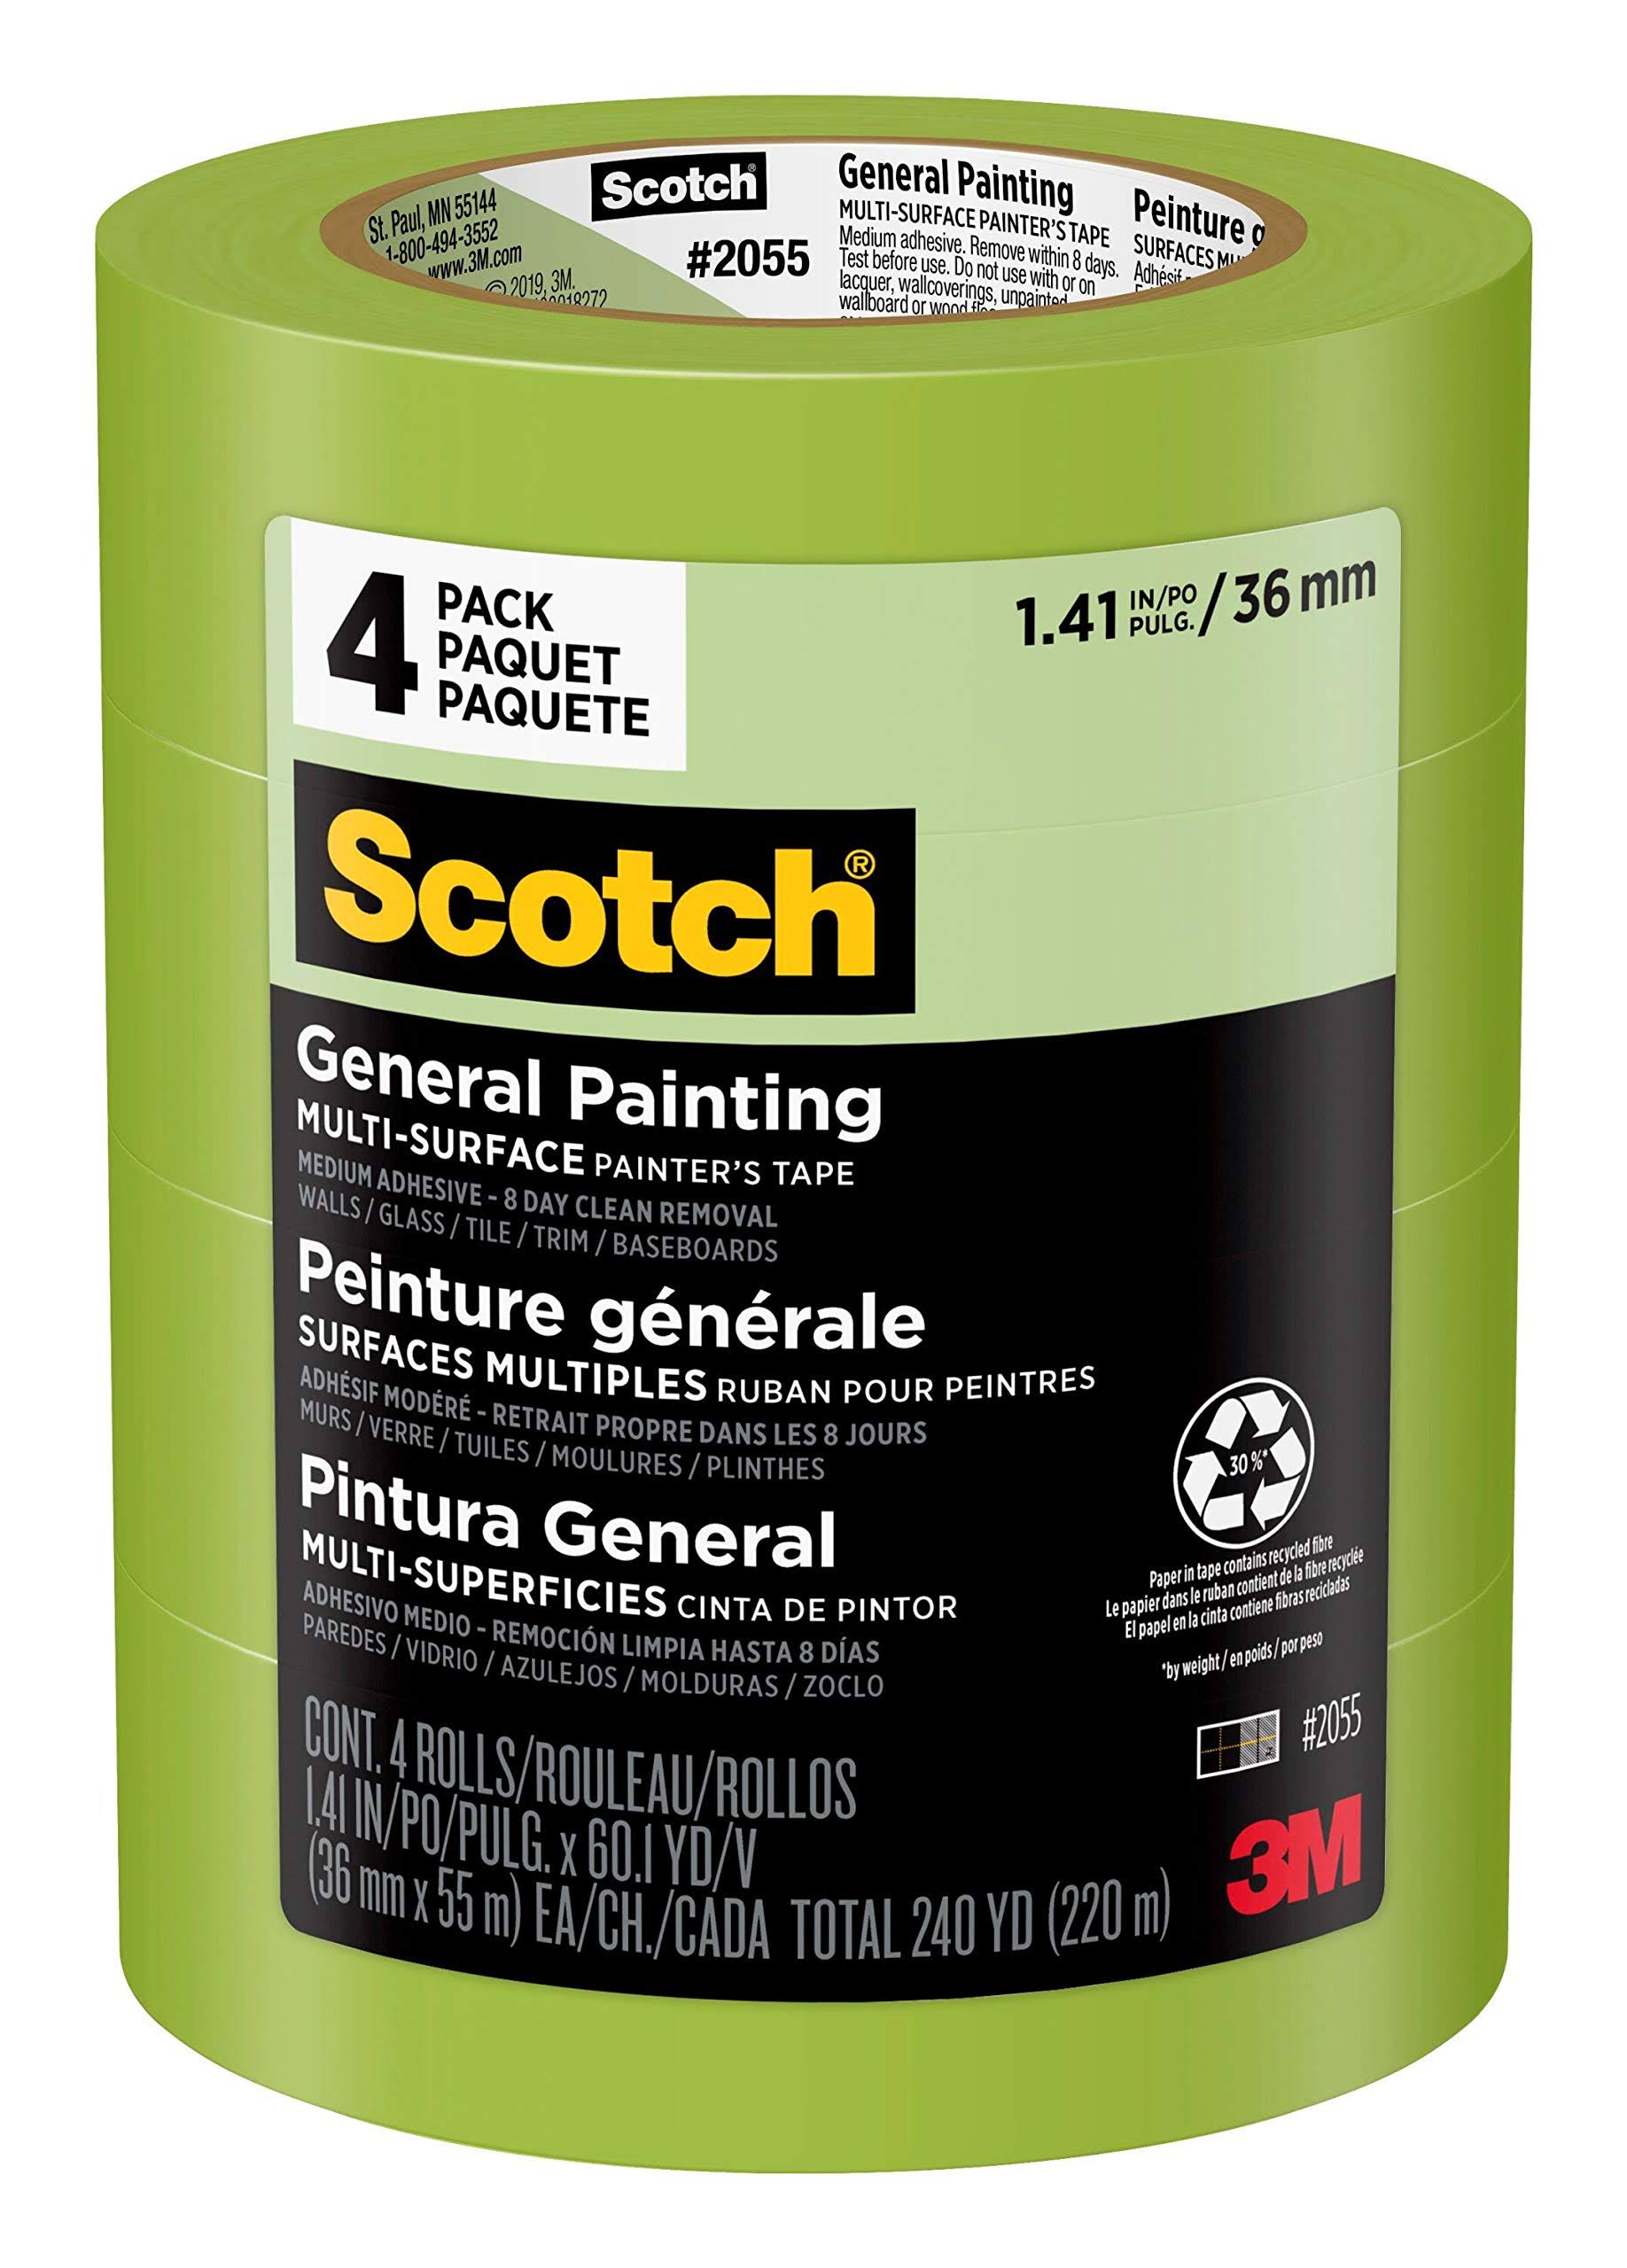 3M Scotch General Painting Multi-Surface Painter's Tape 1.5"CP